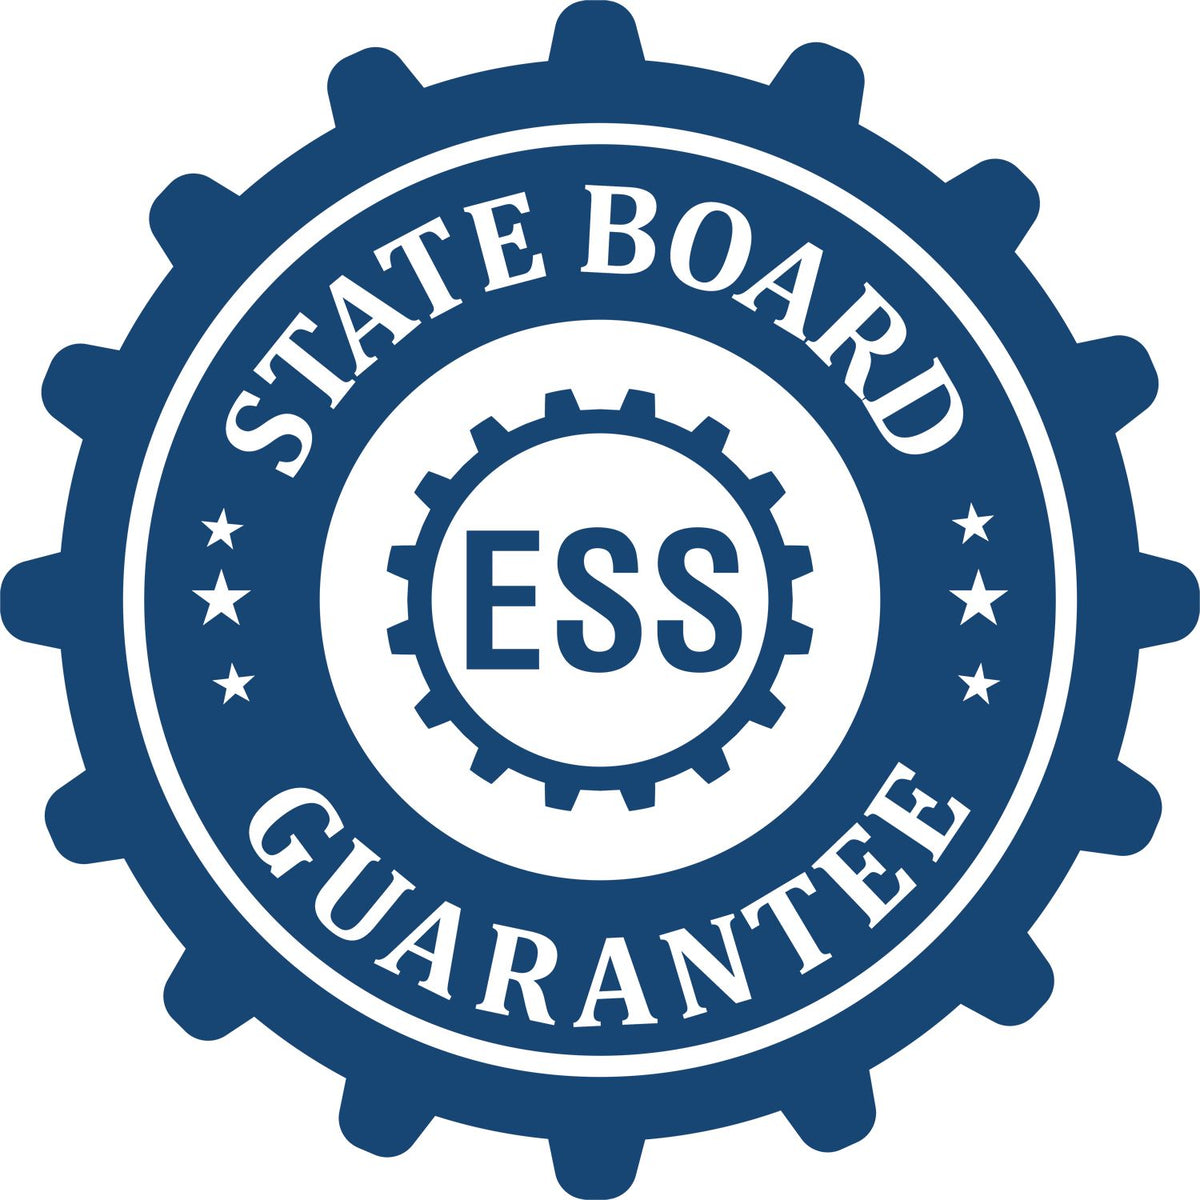 An emblem in a gear shape illustrating a state board guarantee for the State of Nevada Long Reach Architectural Embossing Seal product.